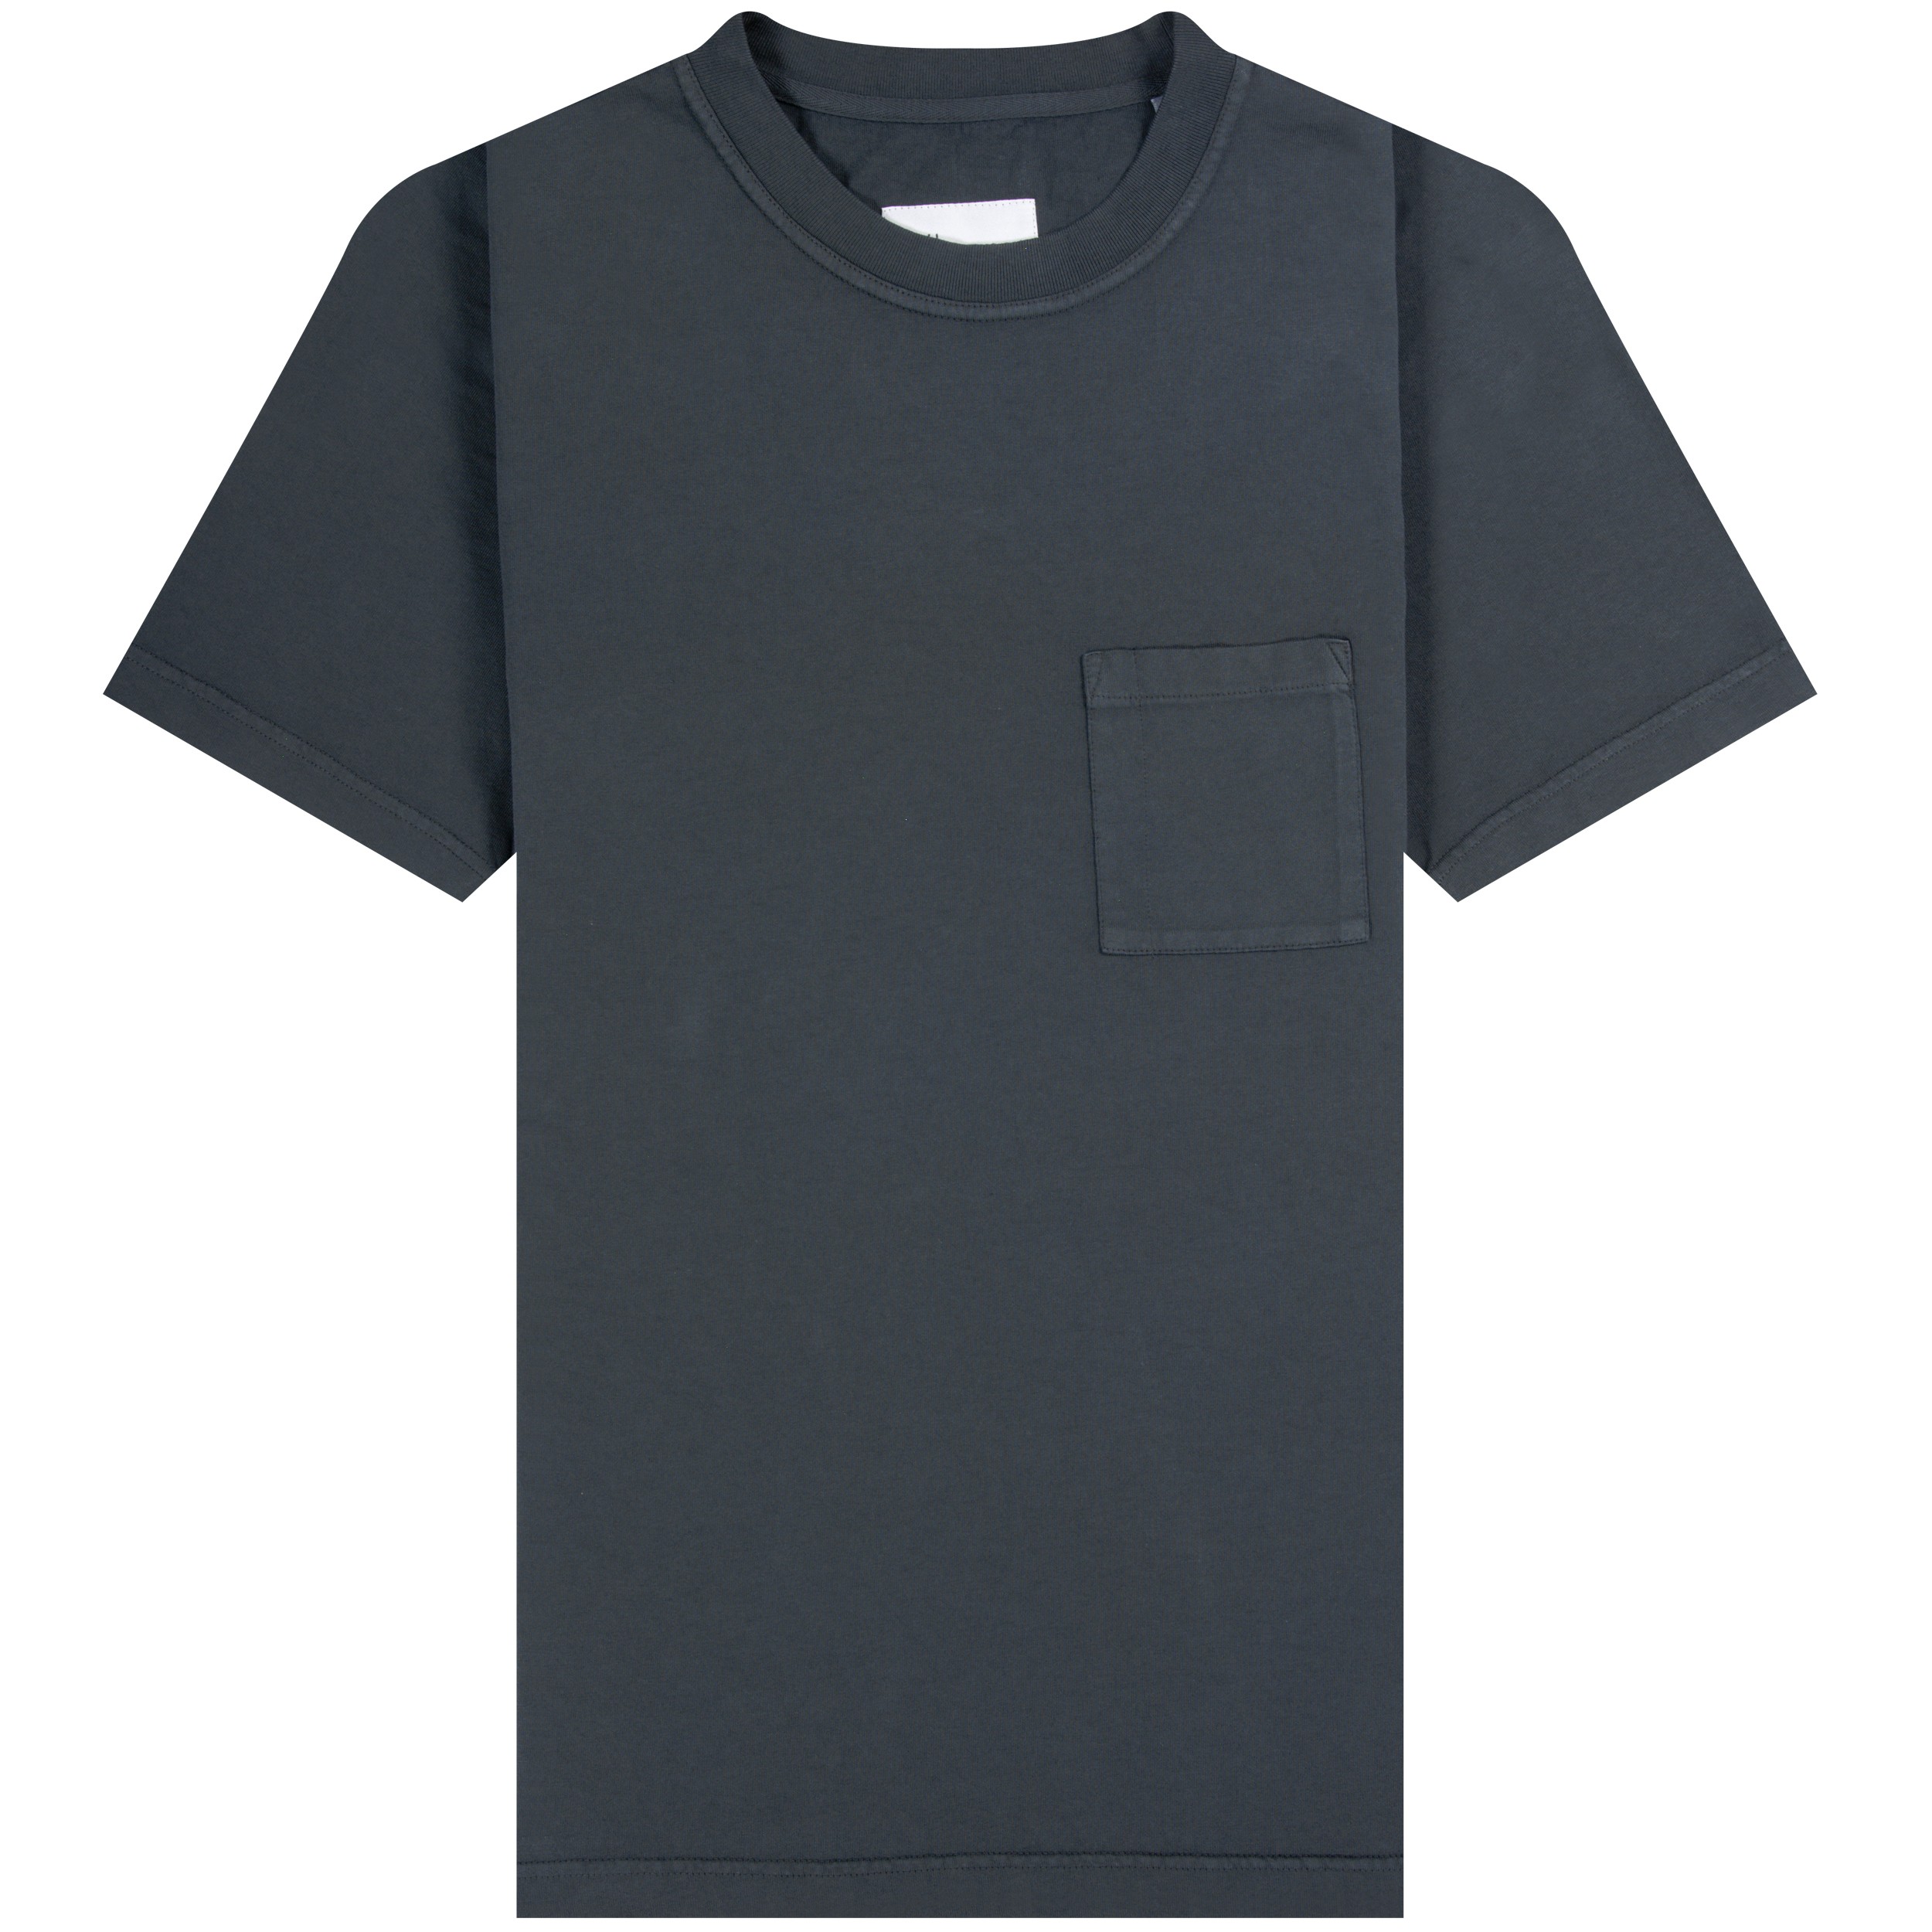 ALBAM 'Workwear' Chest Pocket T-Shirt Charcoal